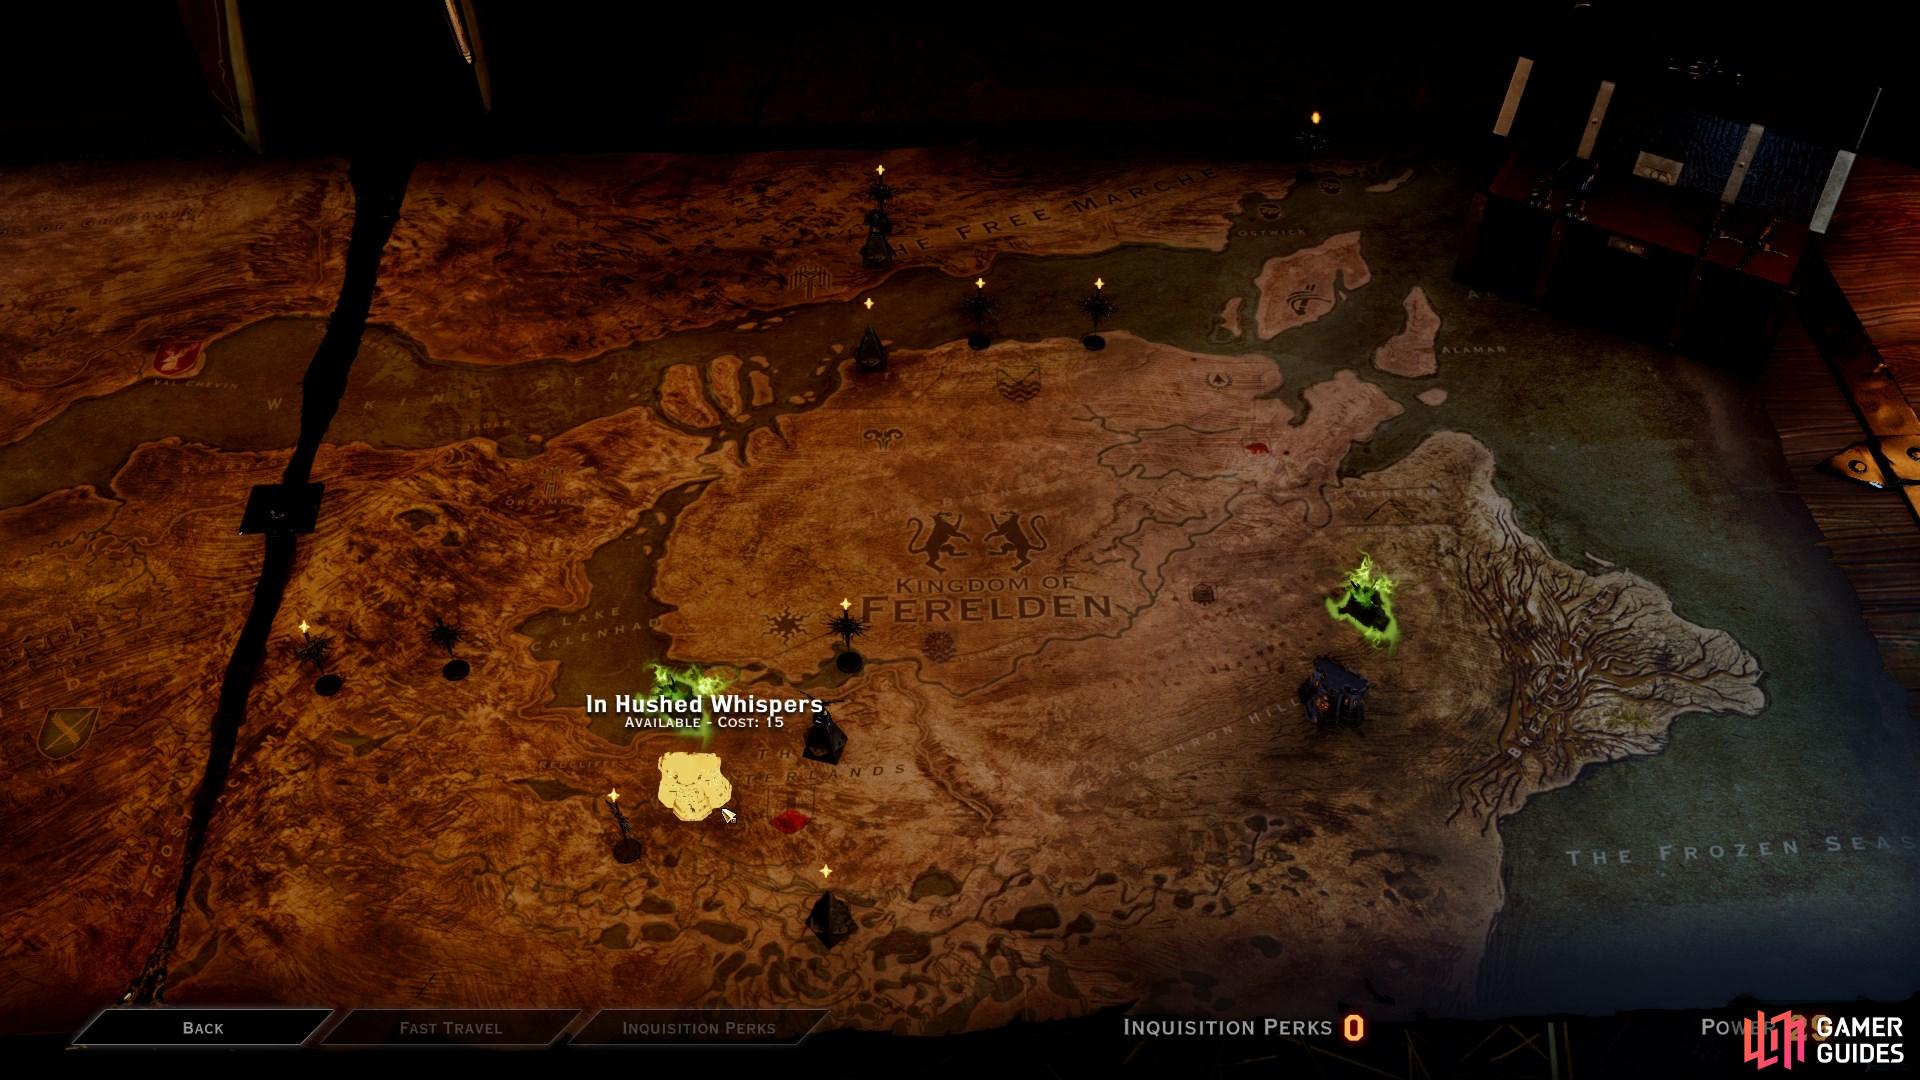 Select 'In Hushed Whispers' on the map to begin the quest with the mages.